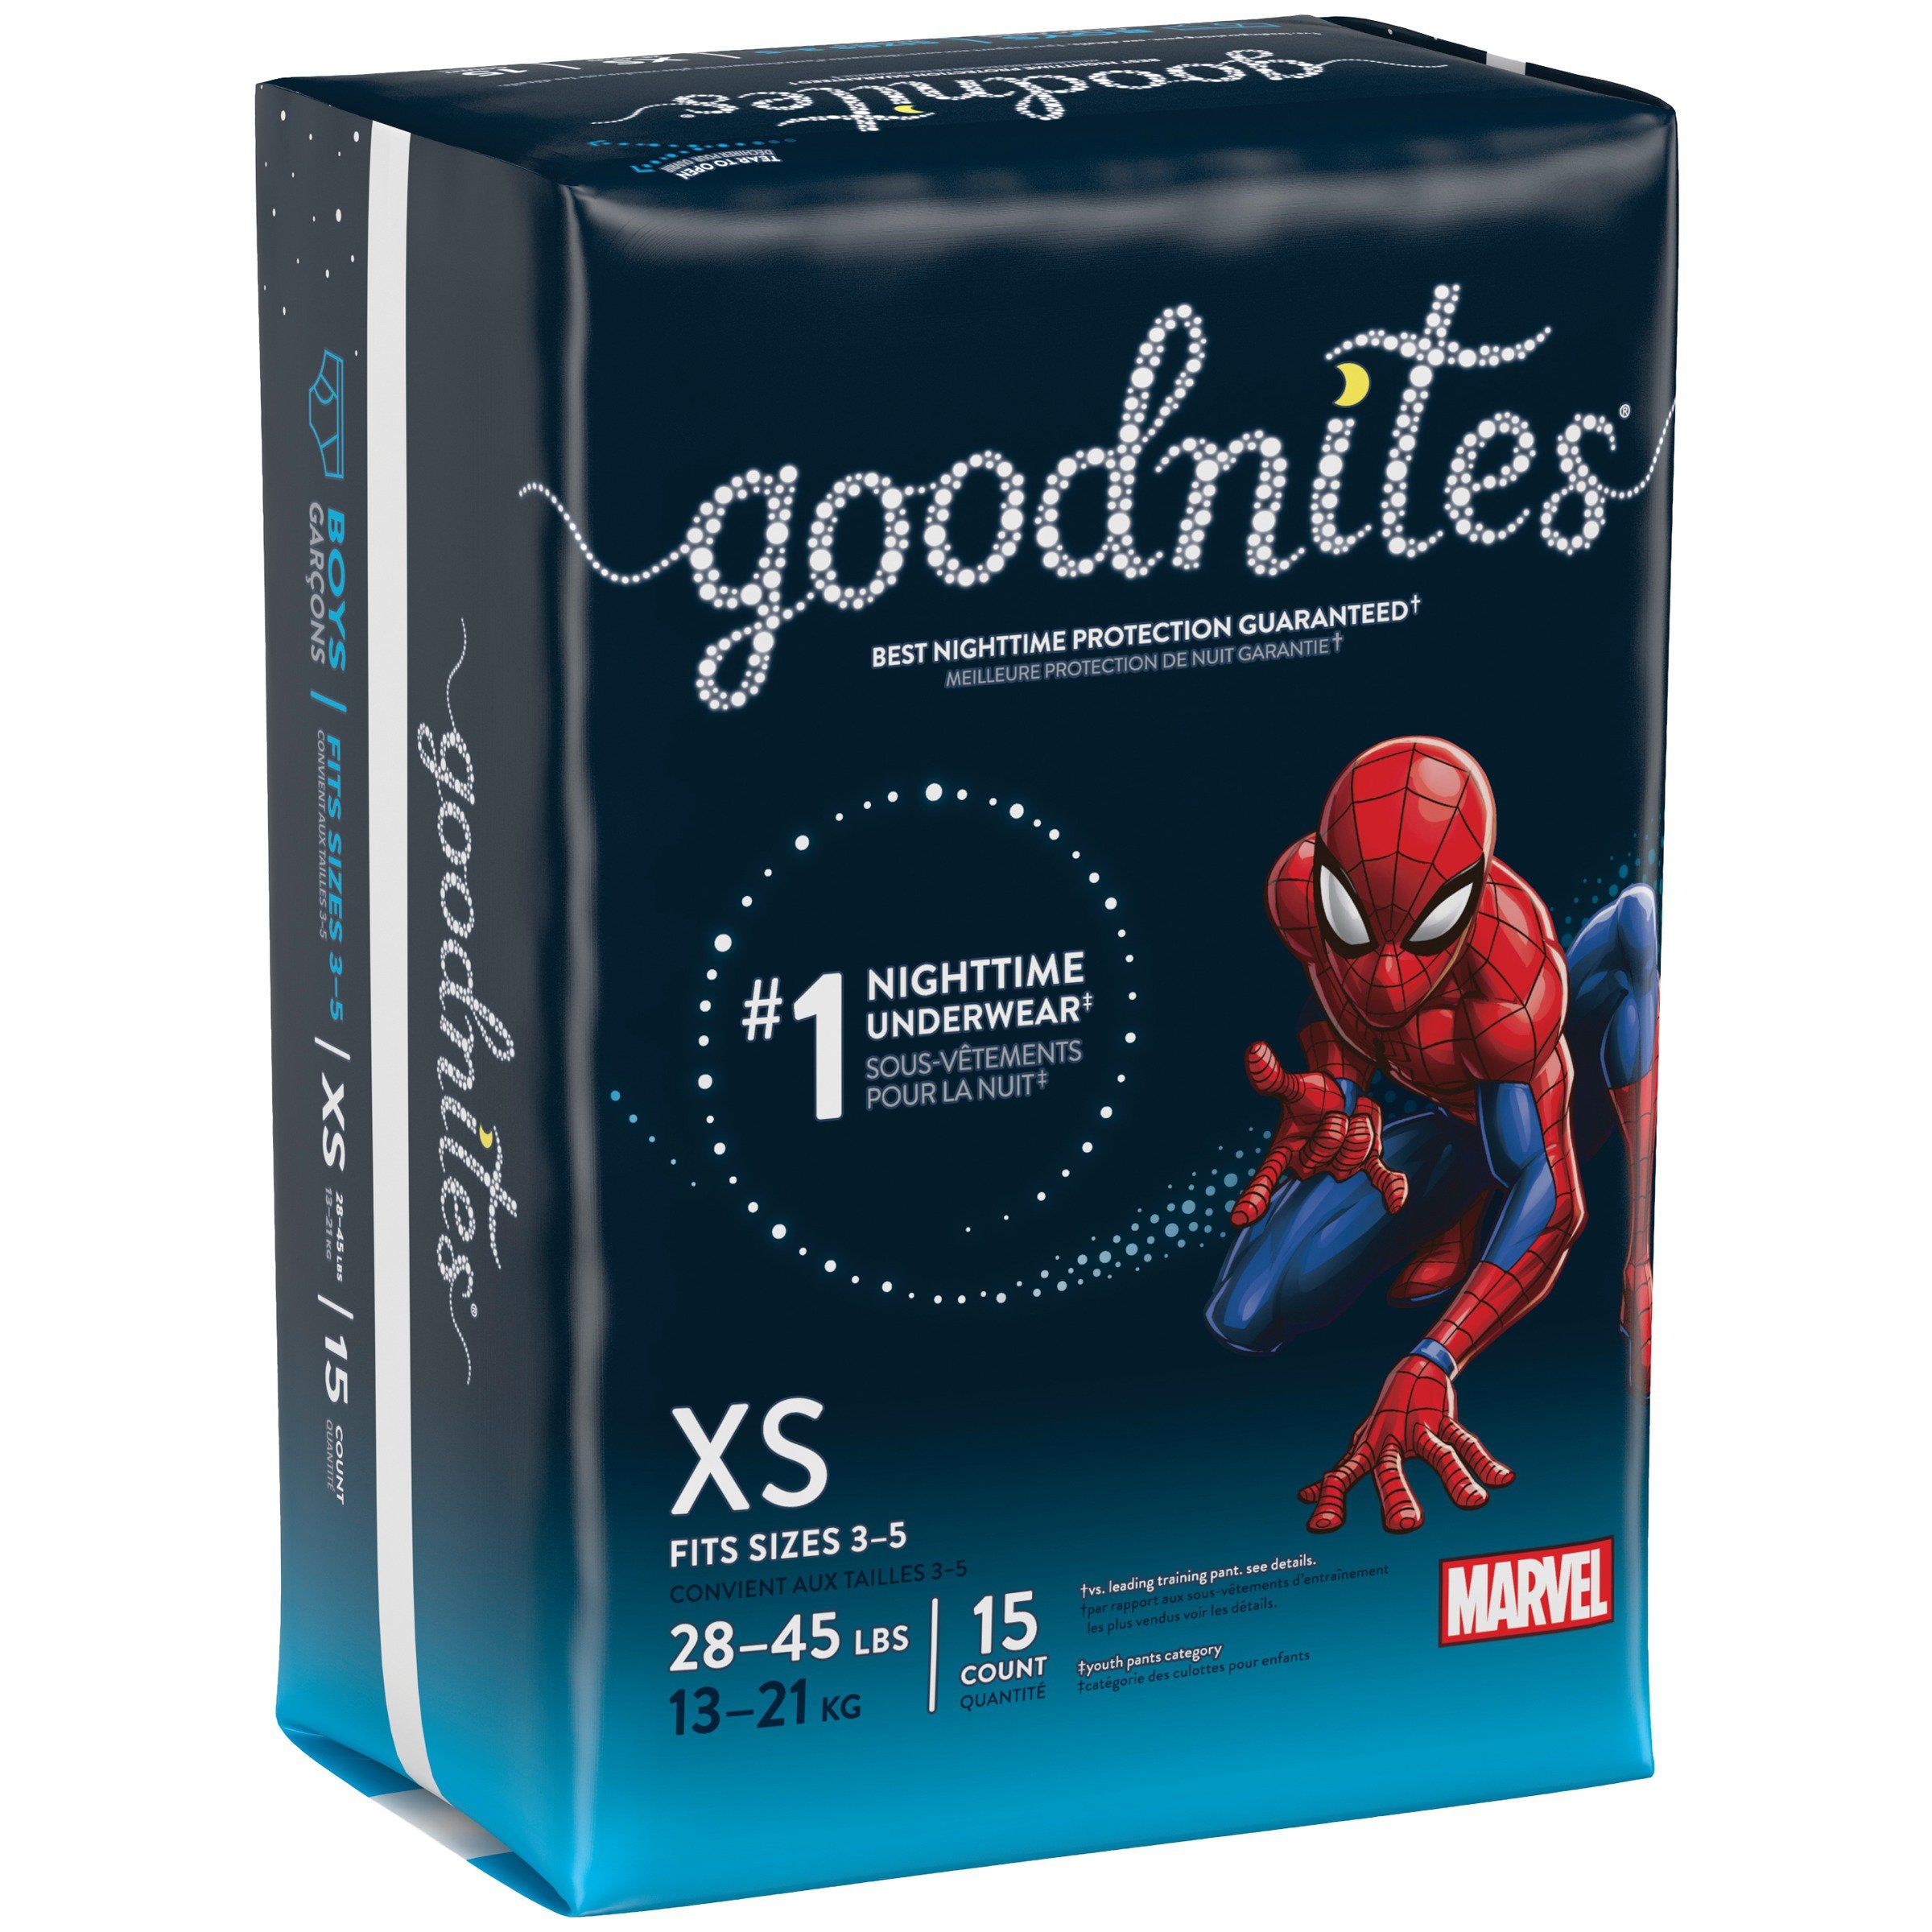 GoodNites Nighttime Underwear for Boys, Extra Small - 15 count